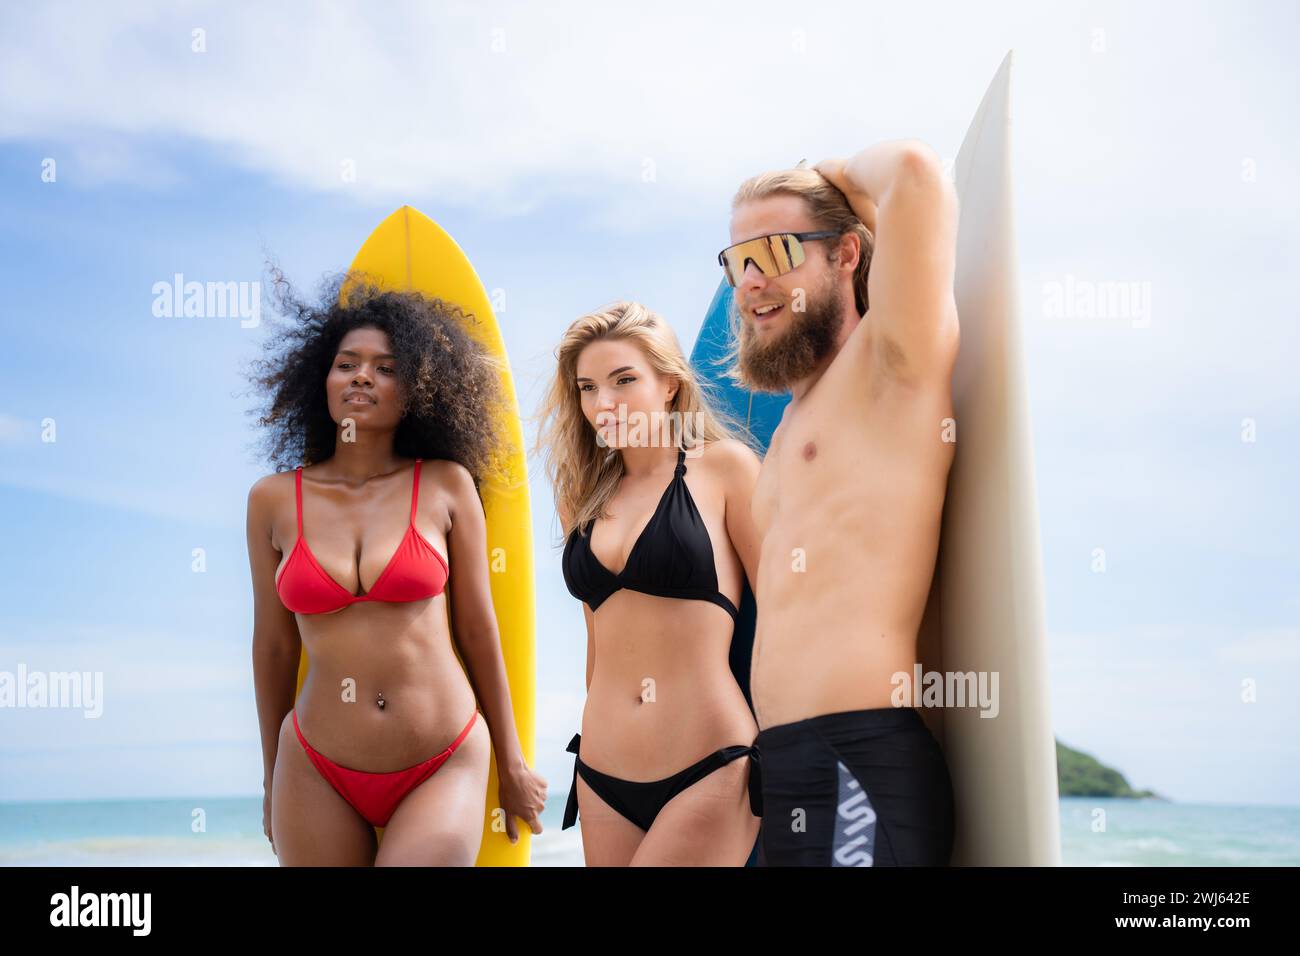 Group of friends in swimsuits posing with surfboards on the beach. Stock Photo